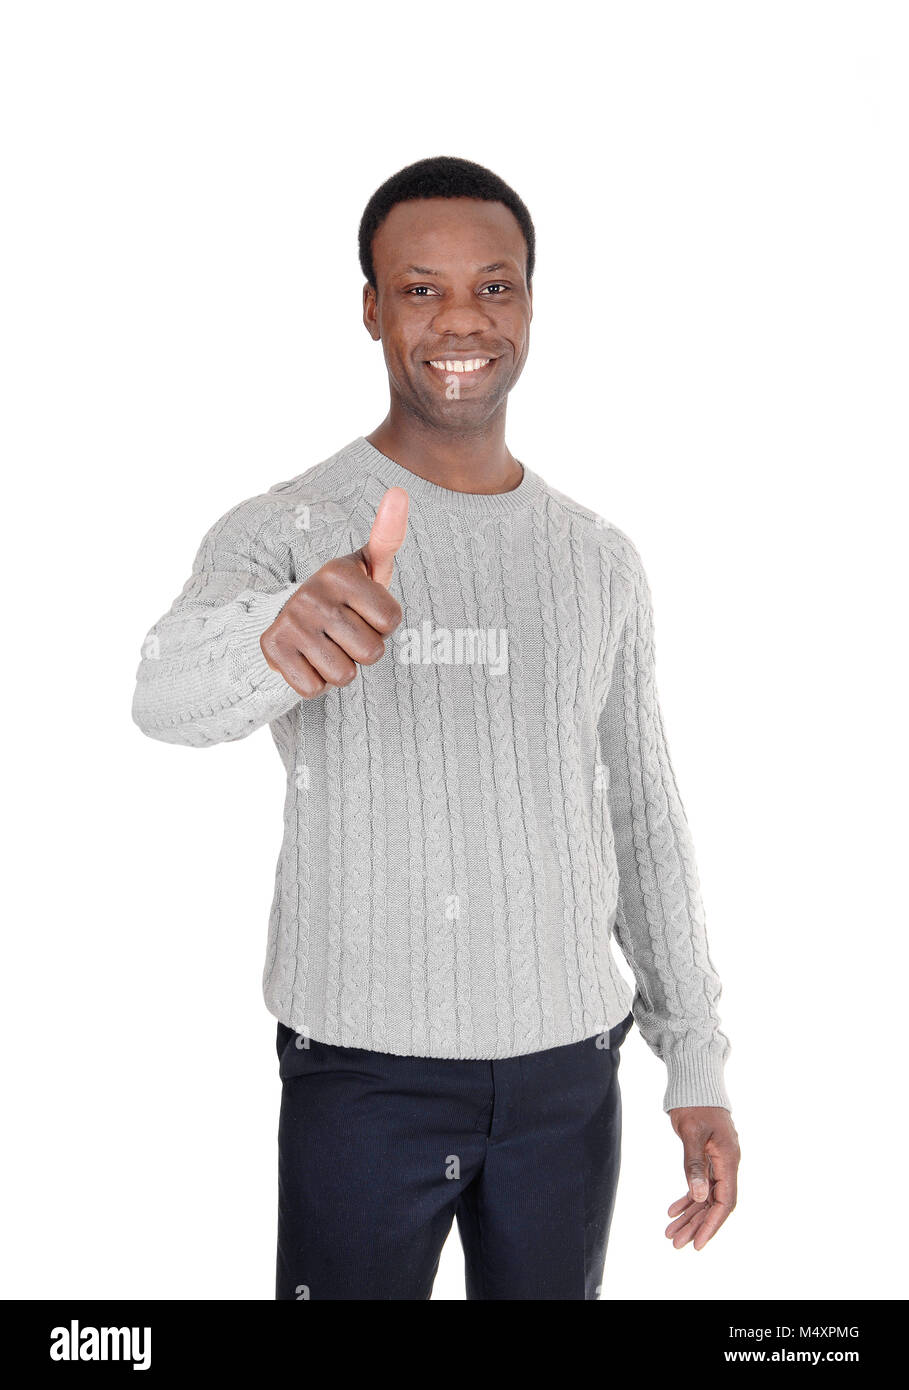 A young African American man in a gray sweater with one hand sign thumps up and smiling, isolated for white background Stock Photo